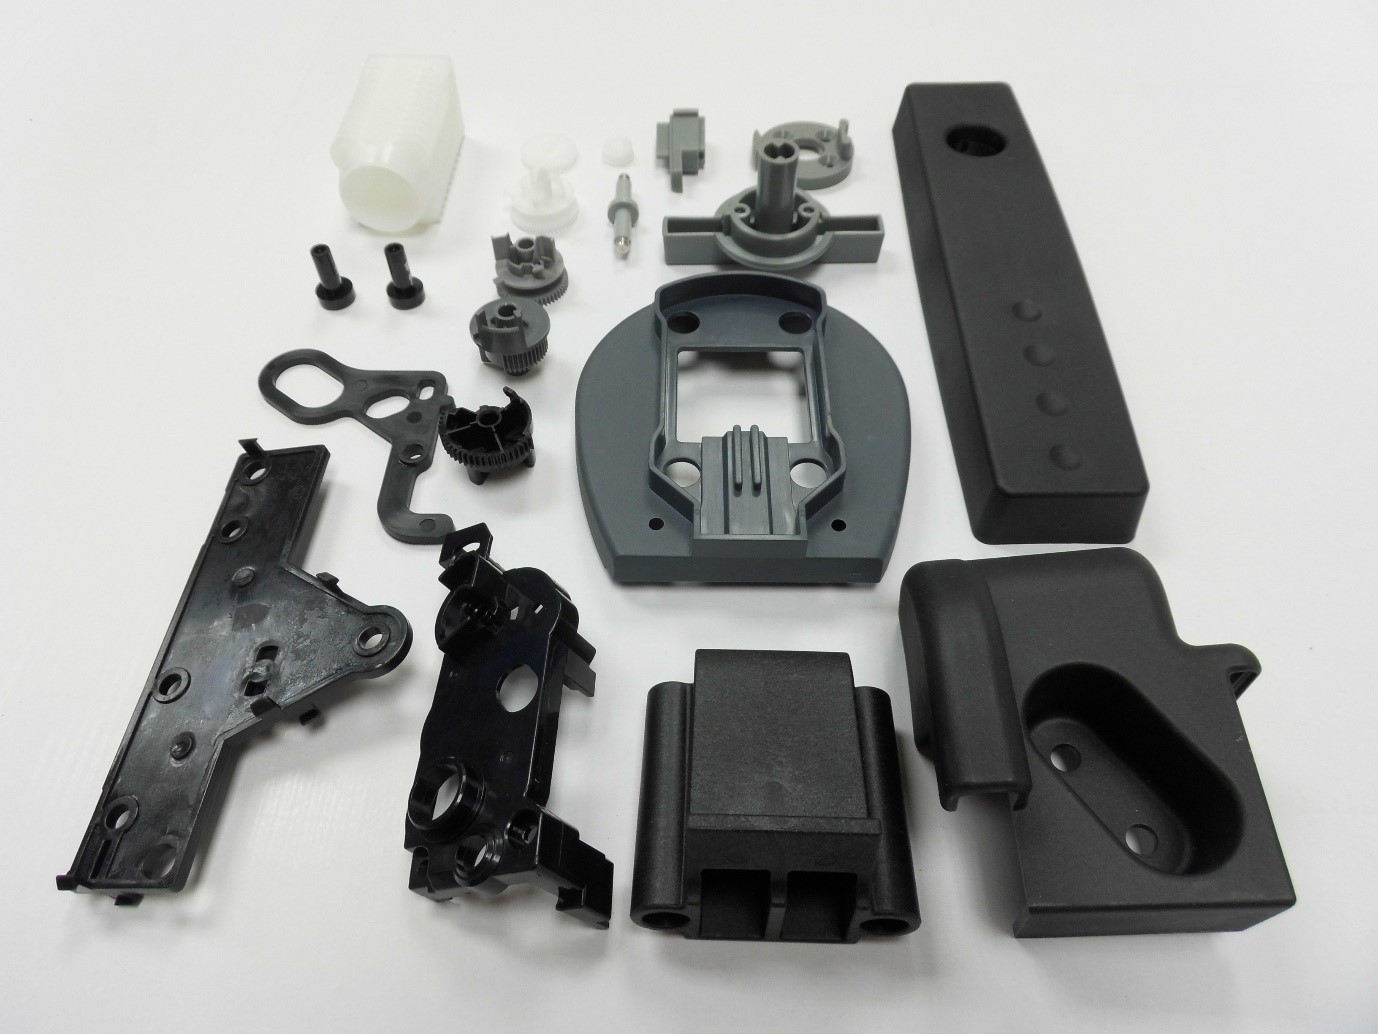 Image of plastic printer parts moulded by BIUK